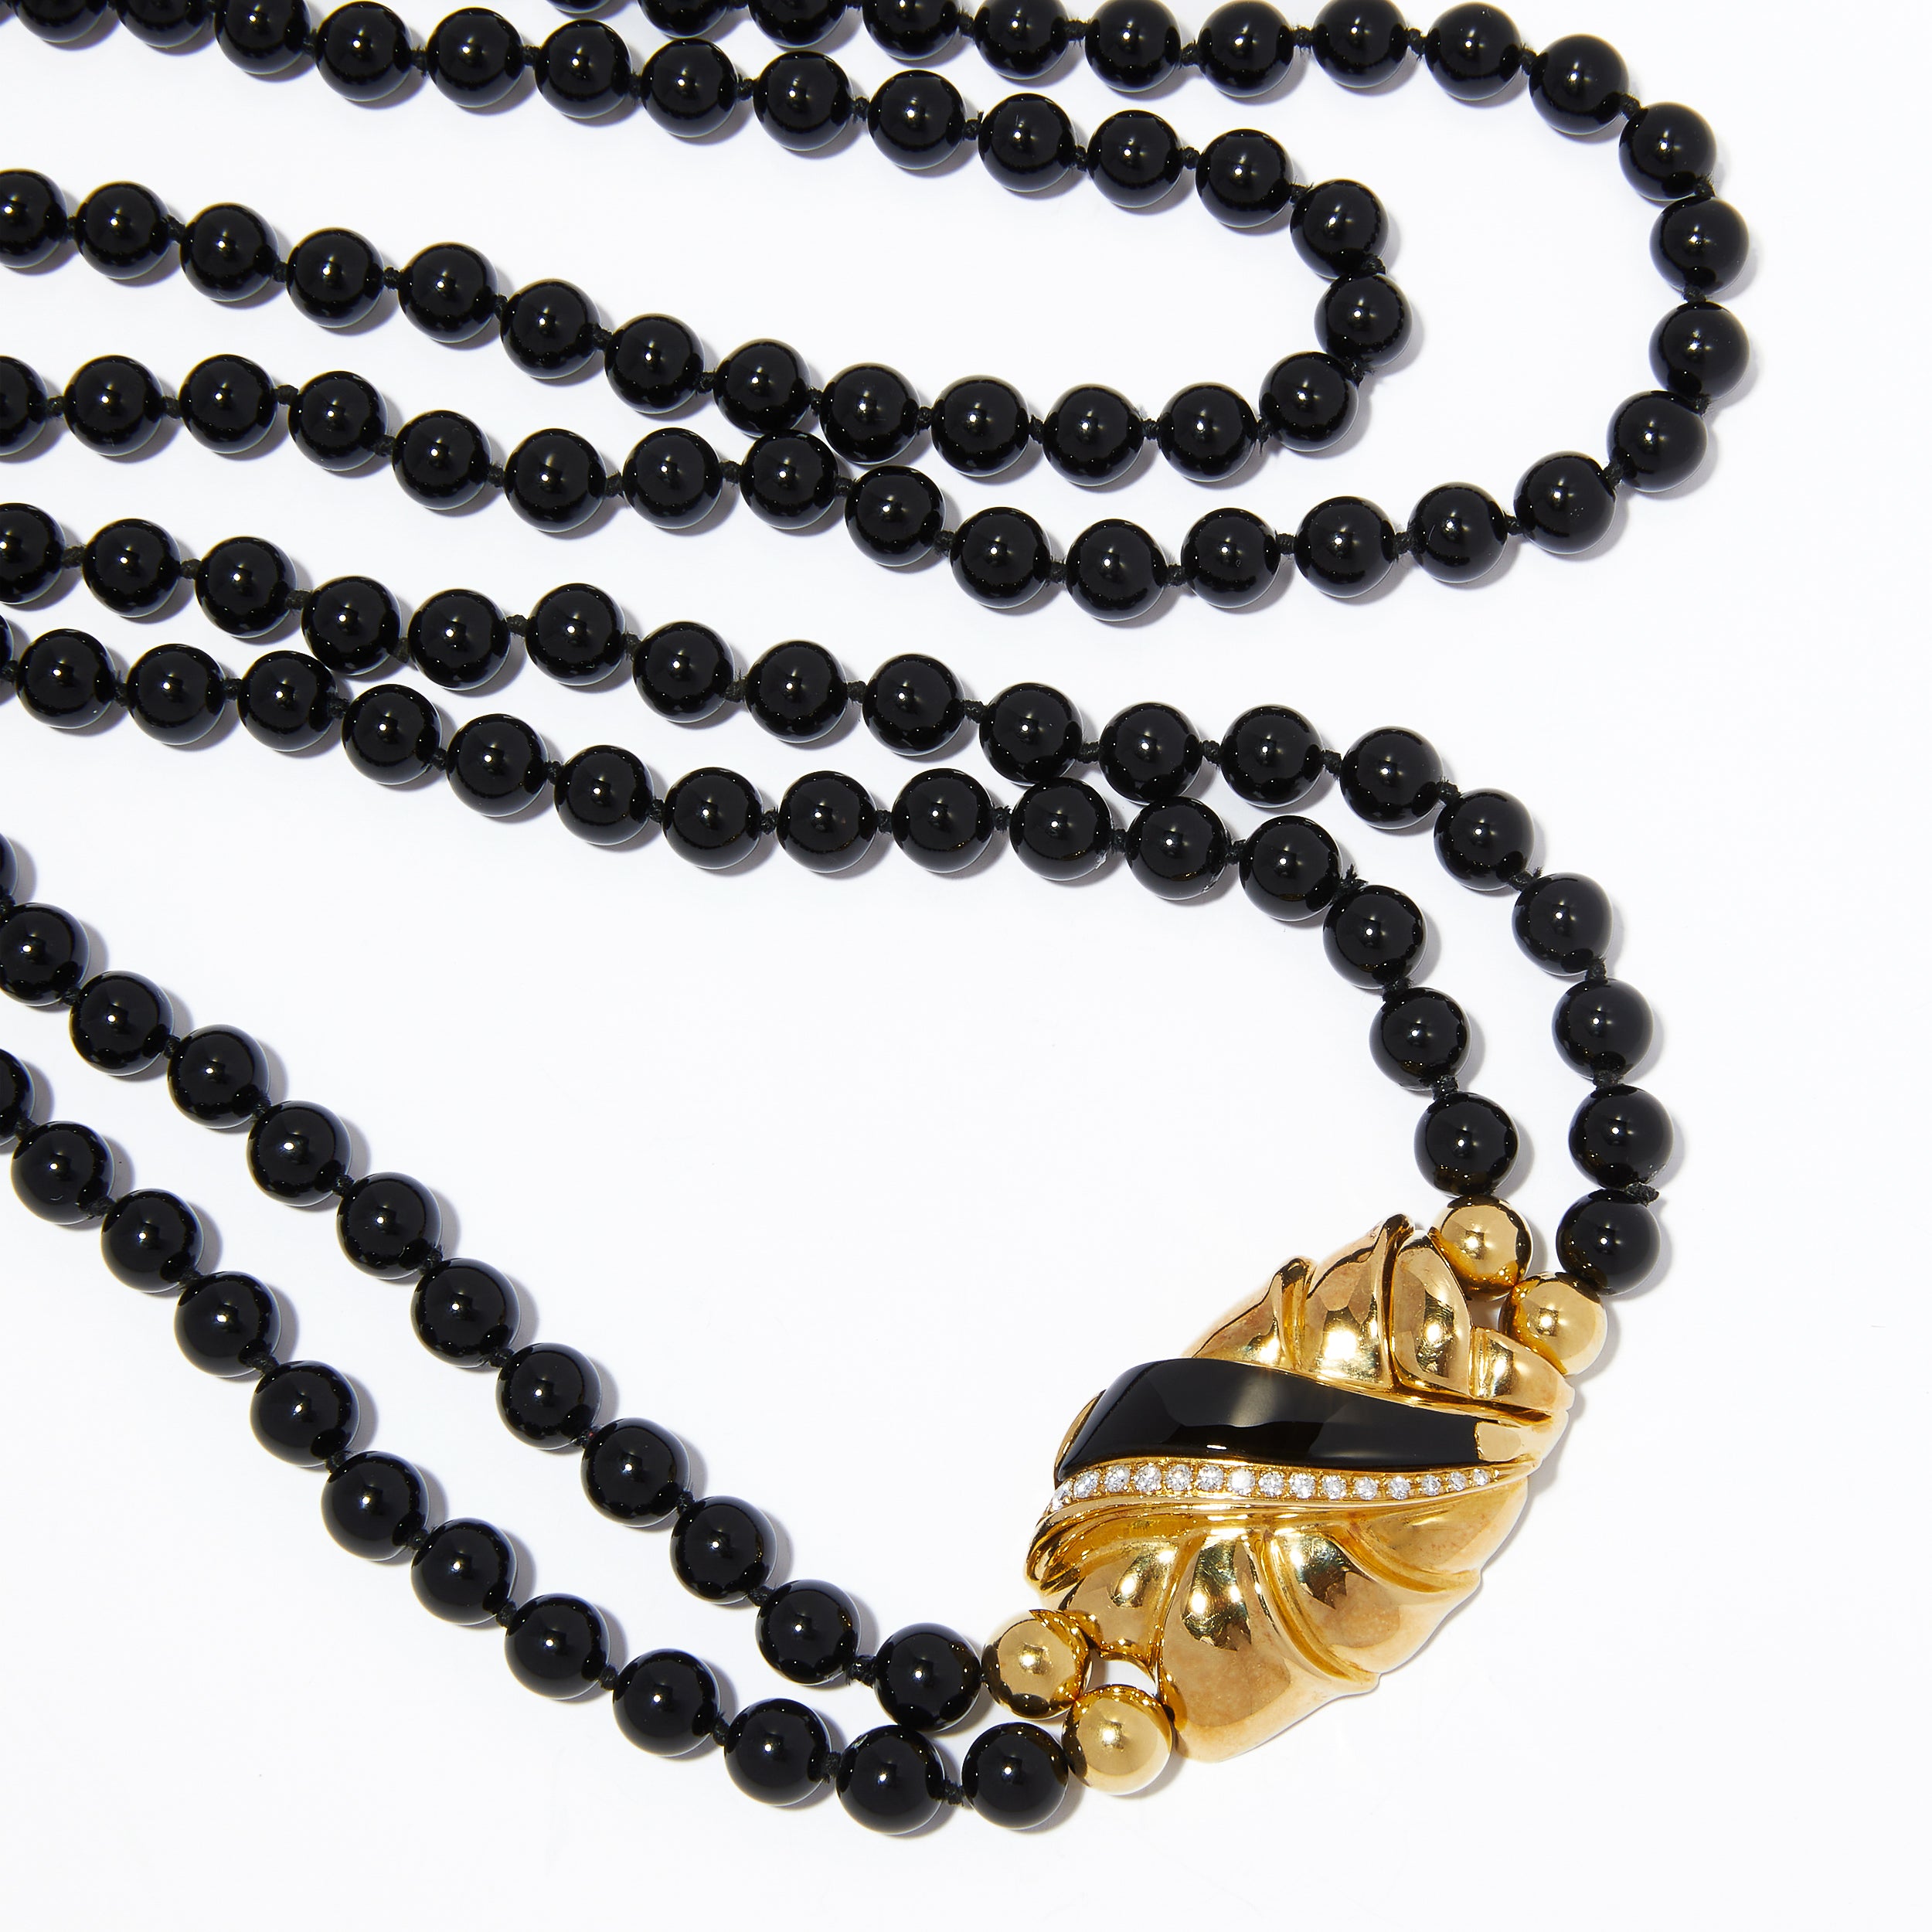 Double-strand black onyx beaded necklace with 18ct gold and diamond clasp.